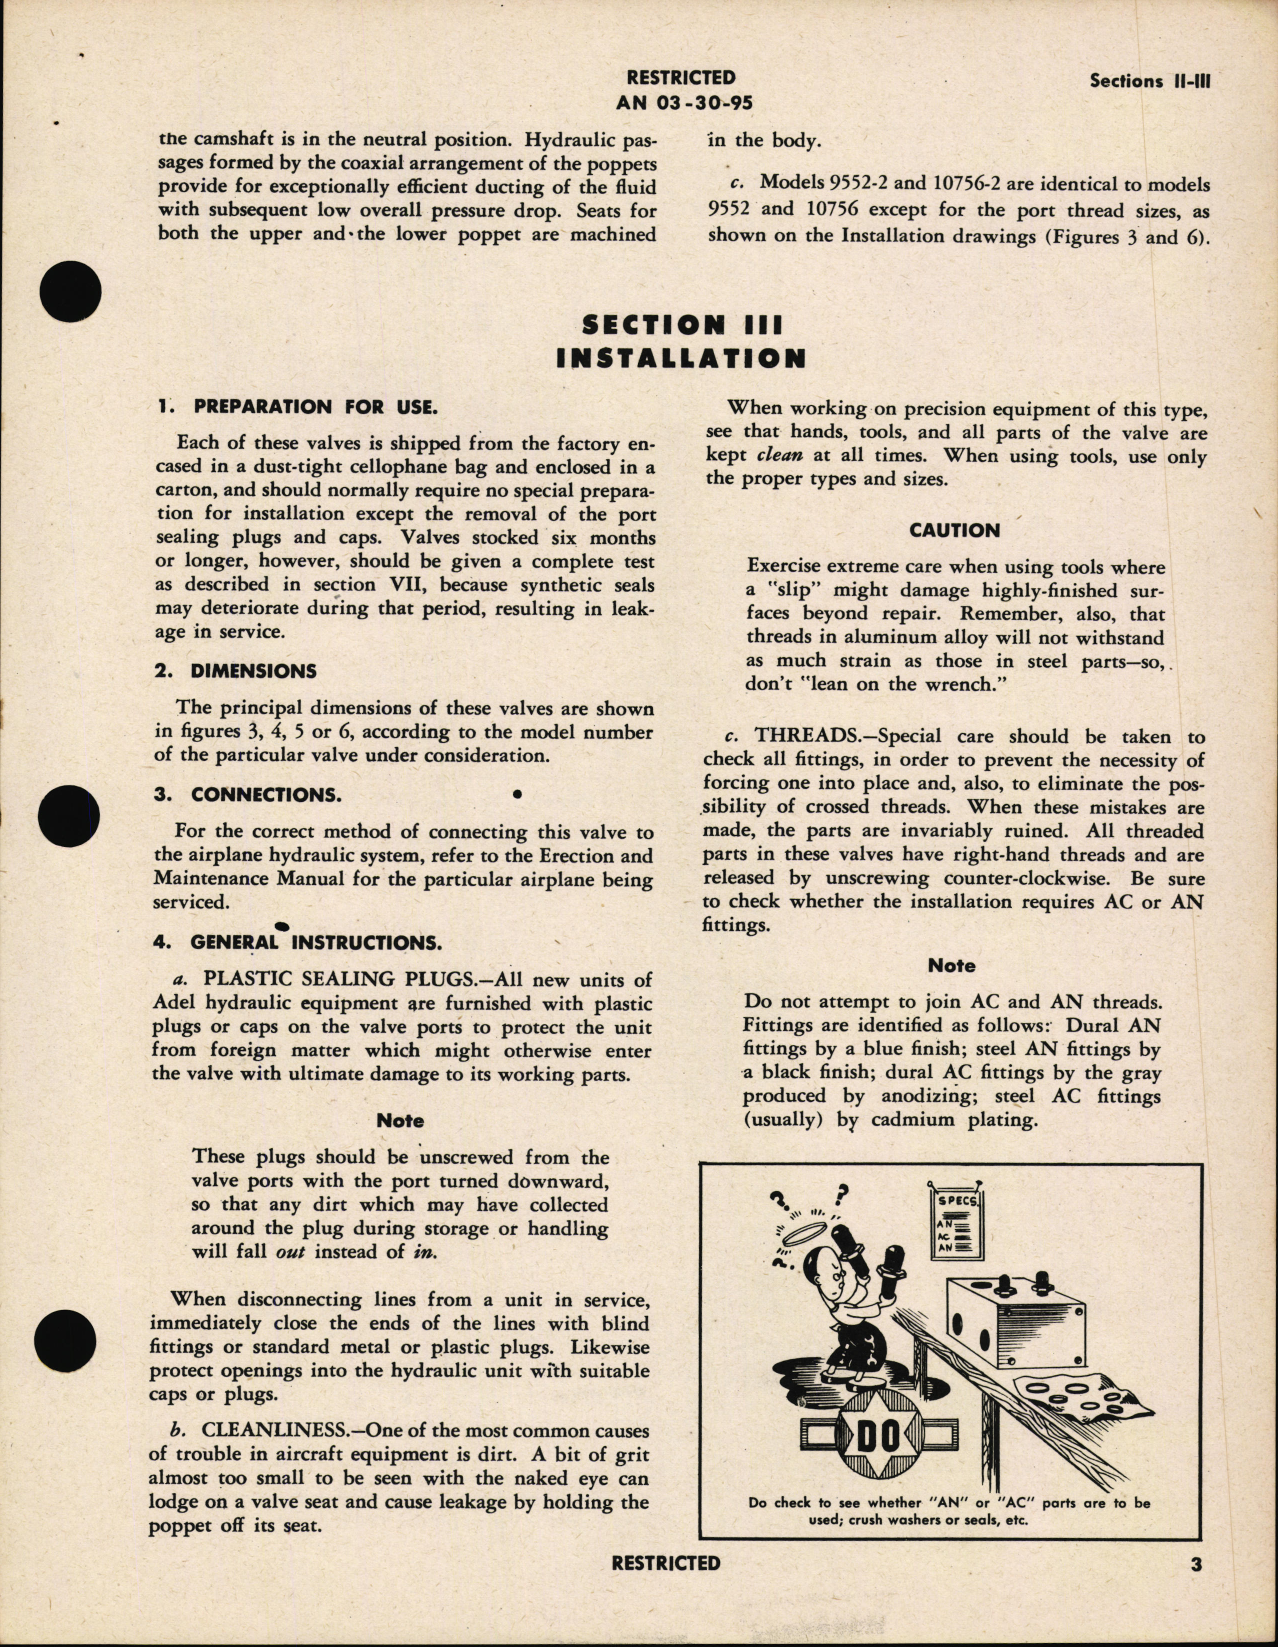 Sample page 7 from AirCorps Library document: Handbook of Instructions with Parts Catalog for Dural Seat Singly Hydraulic Selector Valves (3 Way)